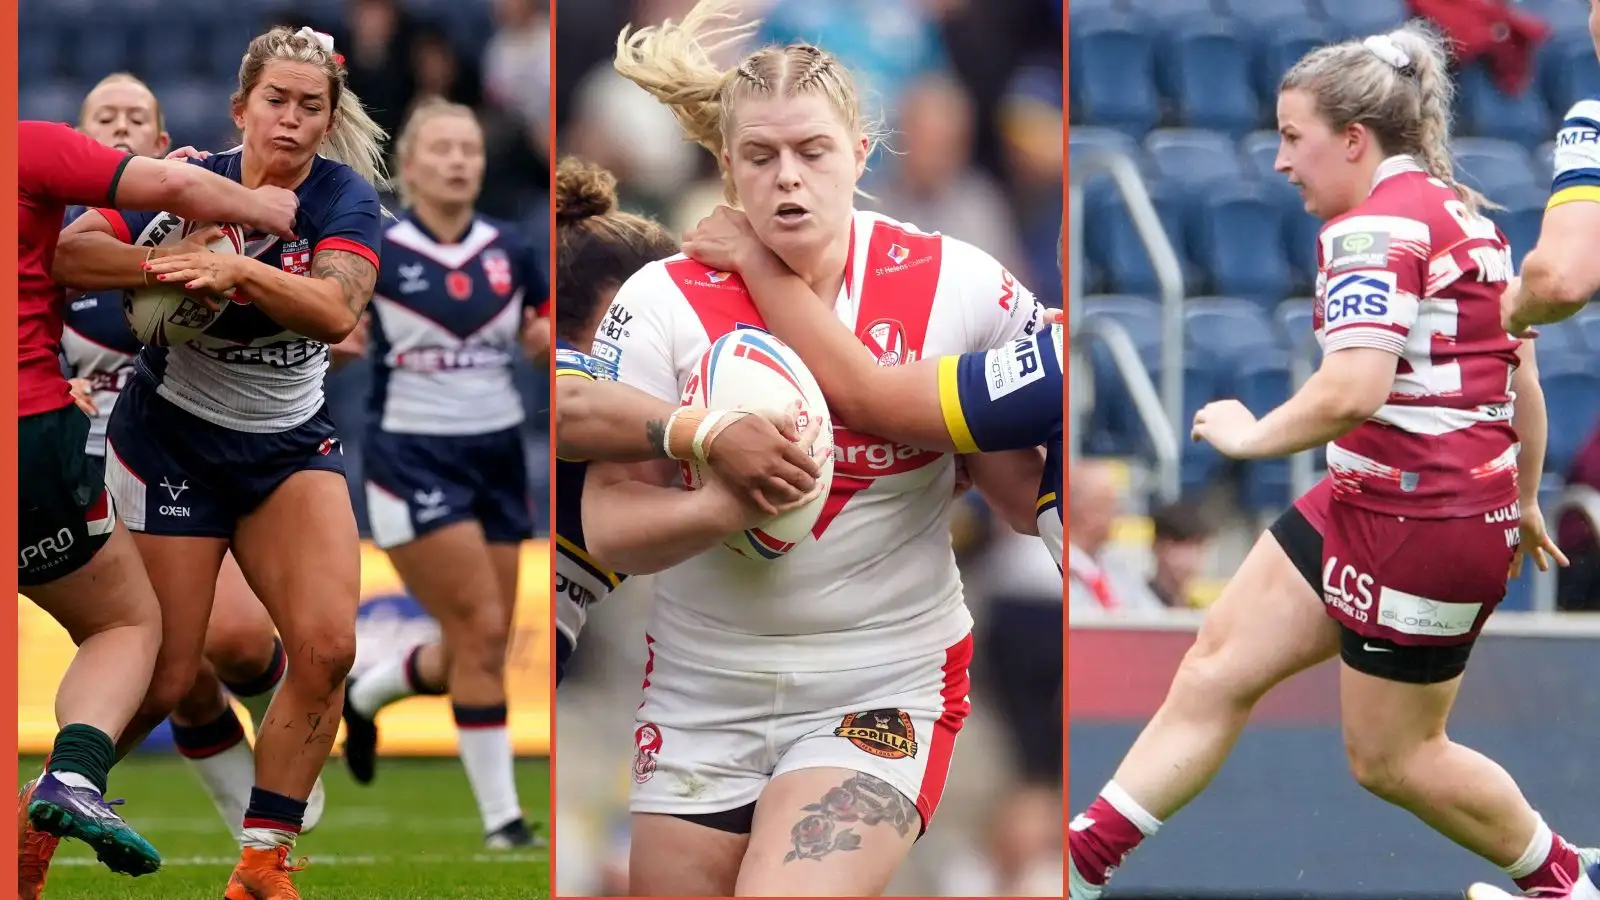 Full-time jobs in the day, rugby players by night: The stories behind Women’s Super League stars